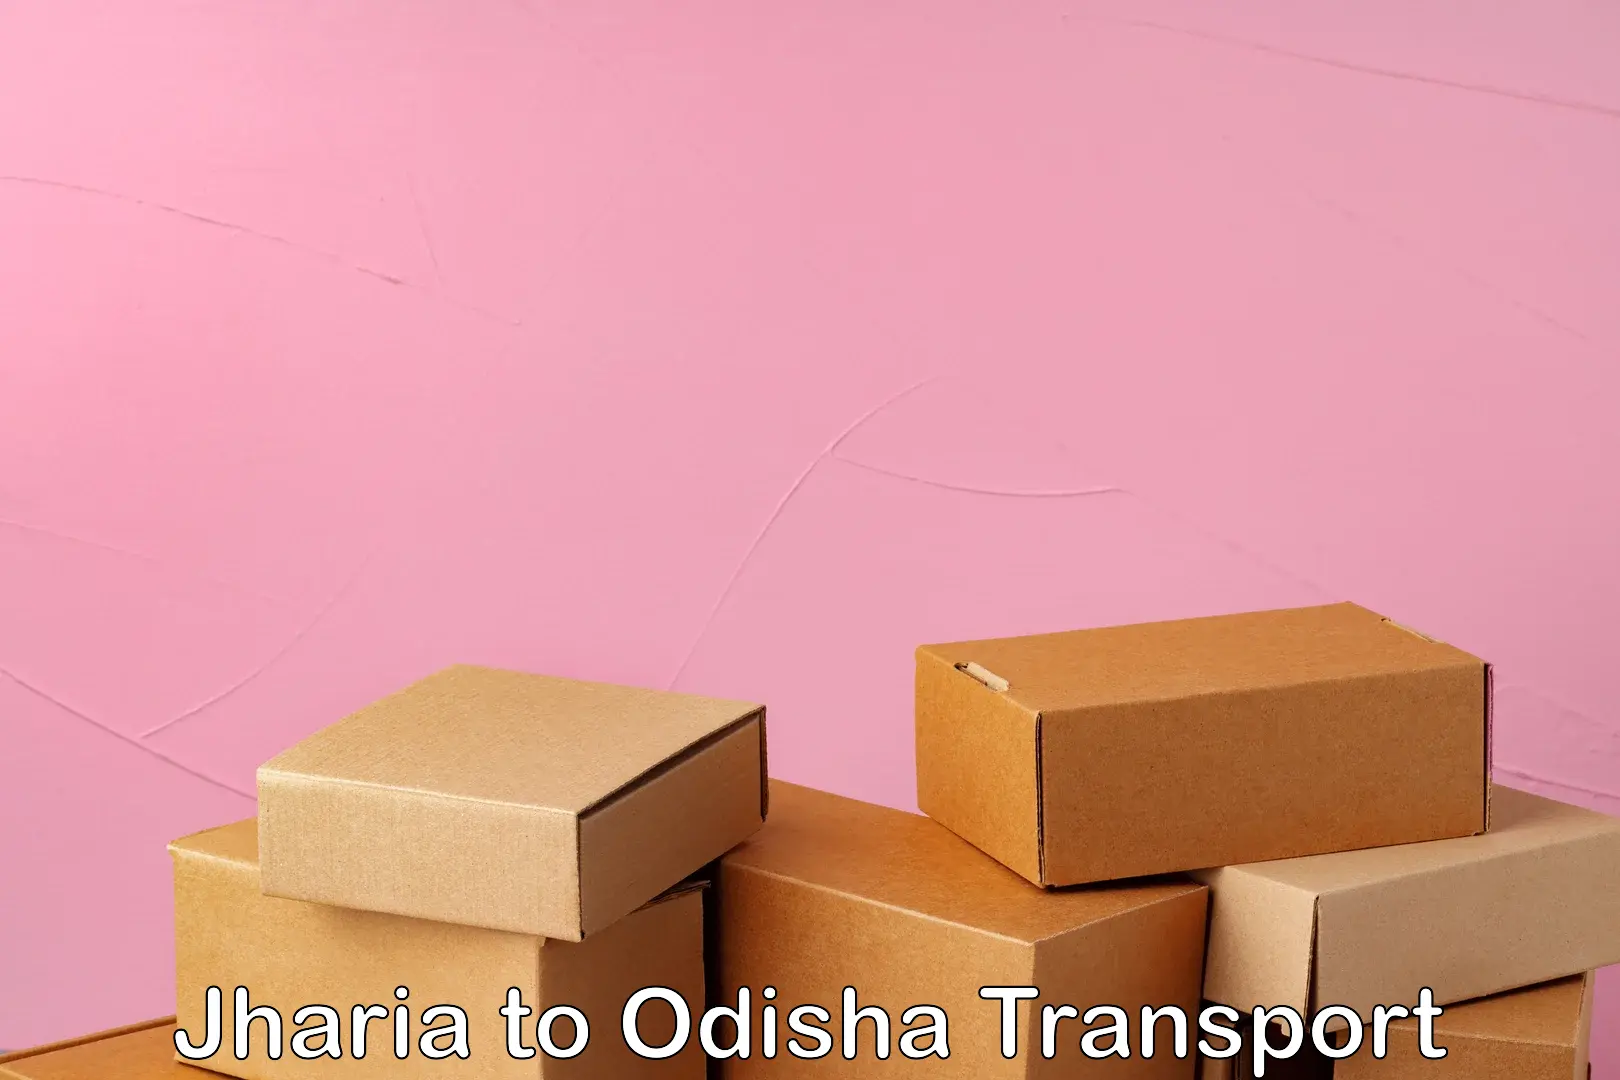 Domestic goods transportation services Jharia to Paradip Port